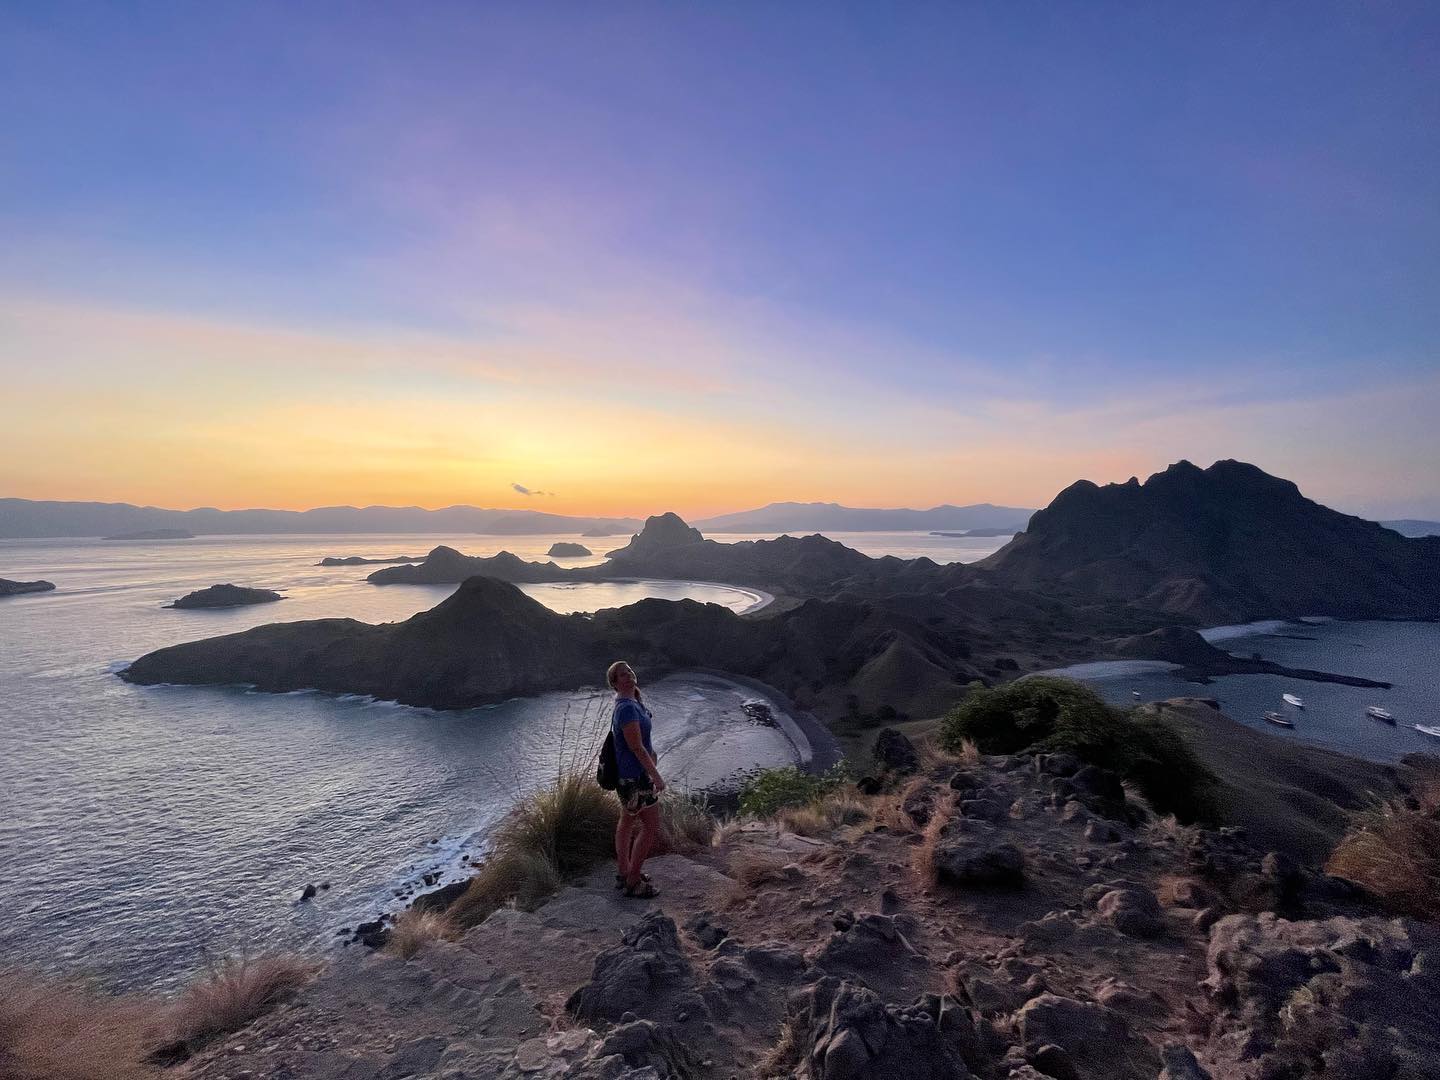 During my 3 night boat trip in the Komodo Islands we visited Padar Island ❤️ Before sunset we hiked up this mountain for the best sunset views! 😍 I even saw deers on the mountain! We stayed here for hours until it was fully dark. With my iPhone flashlight I walked downstairs again. They warned us for snakes when it got dark. All I saw was a lot of very big mouses or something like that 😂🤣 the other group did saw a snake 🙈

#komodoislands #padarisland #boattrips #wanuaadventures #komodonationalpark #sunsetskies #roundtheworldtrip #wereldreis #reizenoverdewereld #reiziger #backpackingtrip #indonesiaparadise #traveladdict #hikingviews #instatravel #womanwhotravel #solotravelers #beautifuldestinations